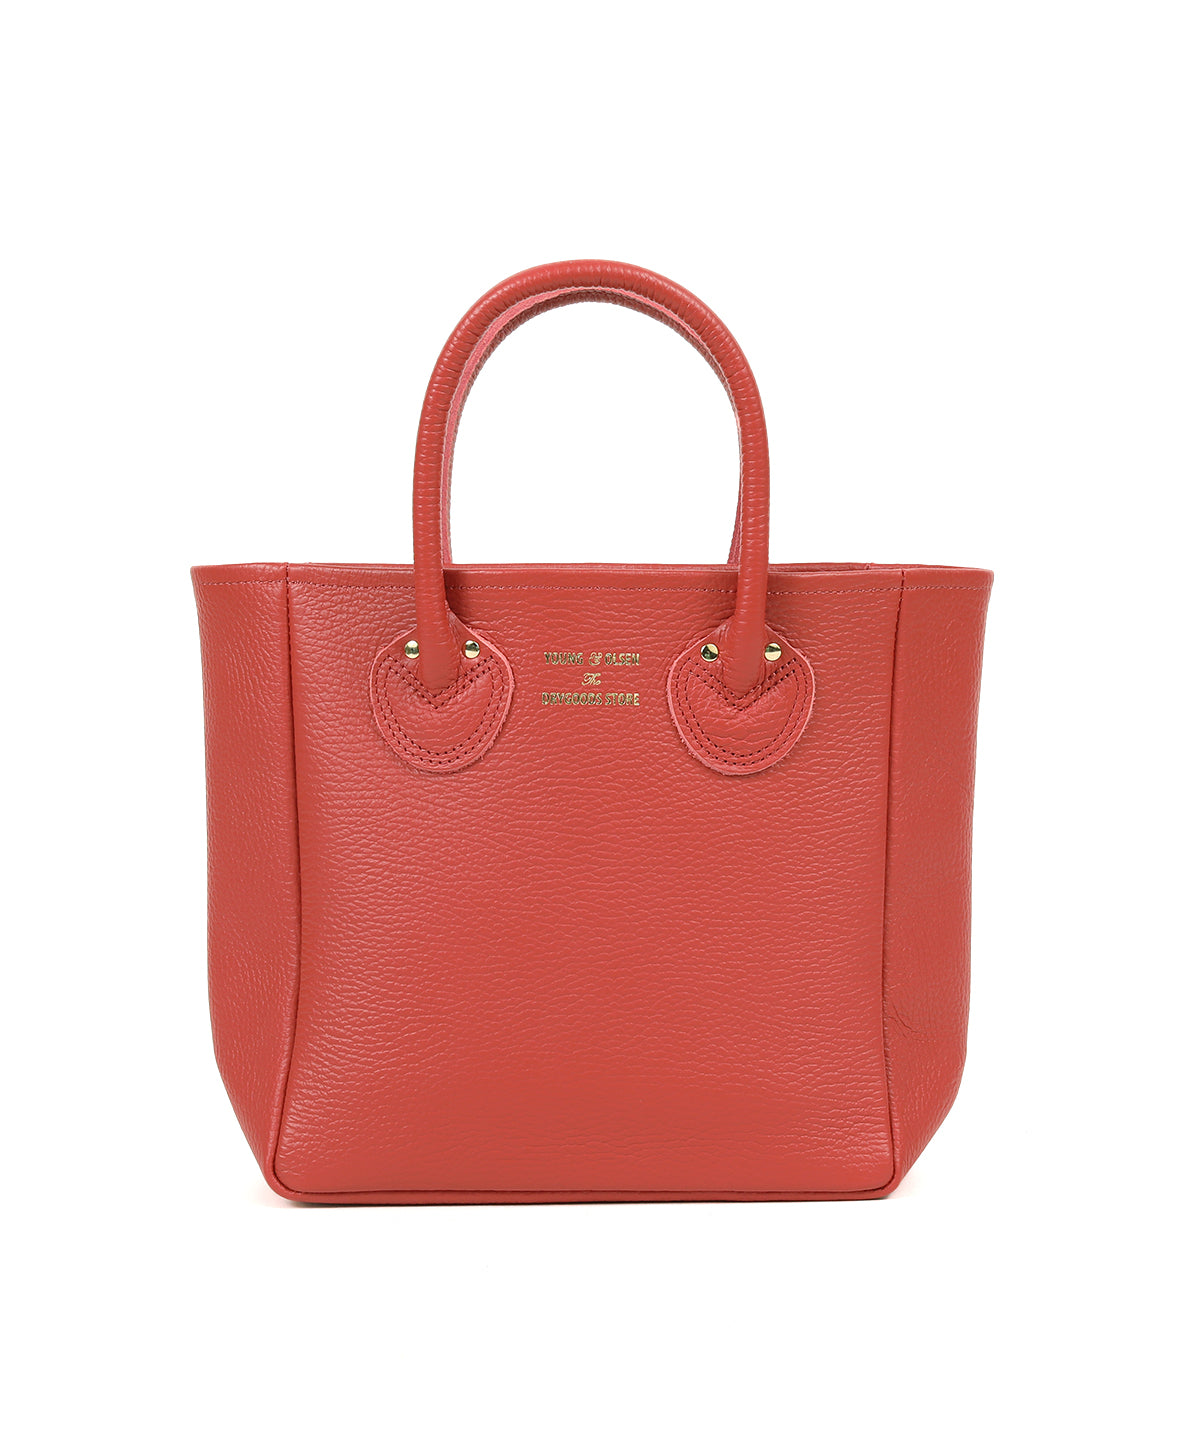 EMBOSSED LEATHER TOTE S